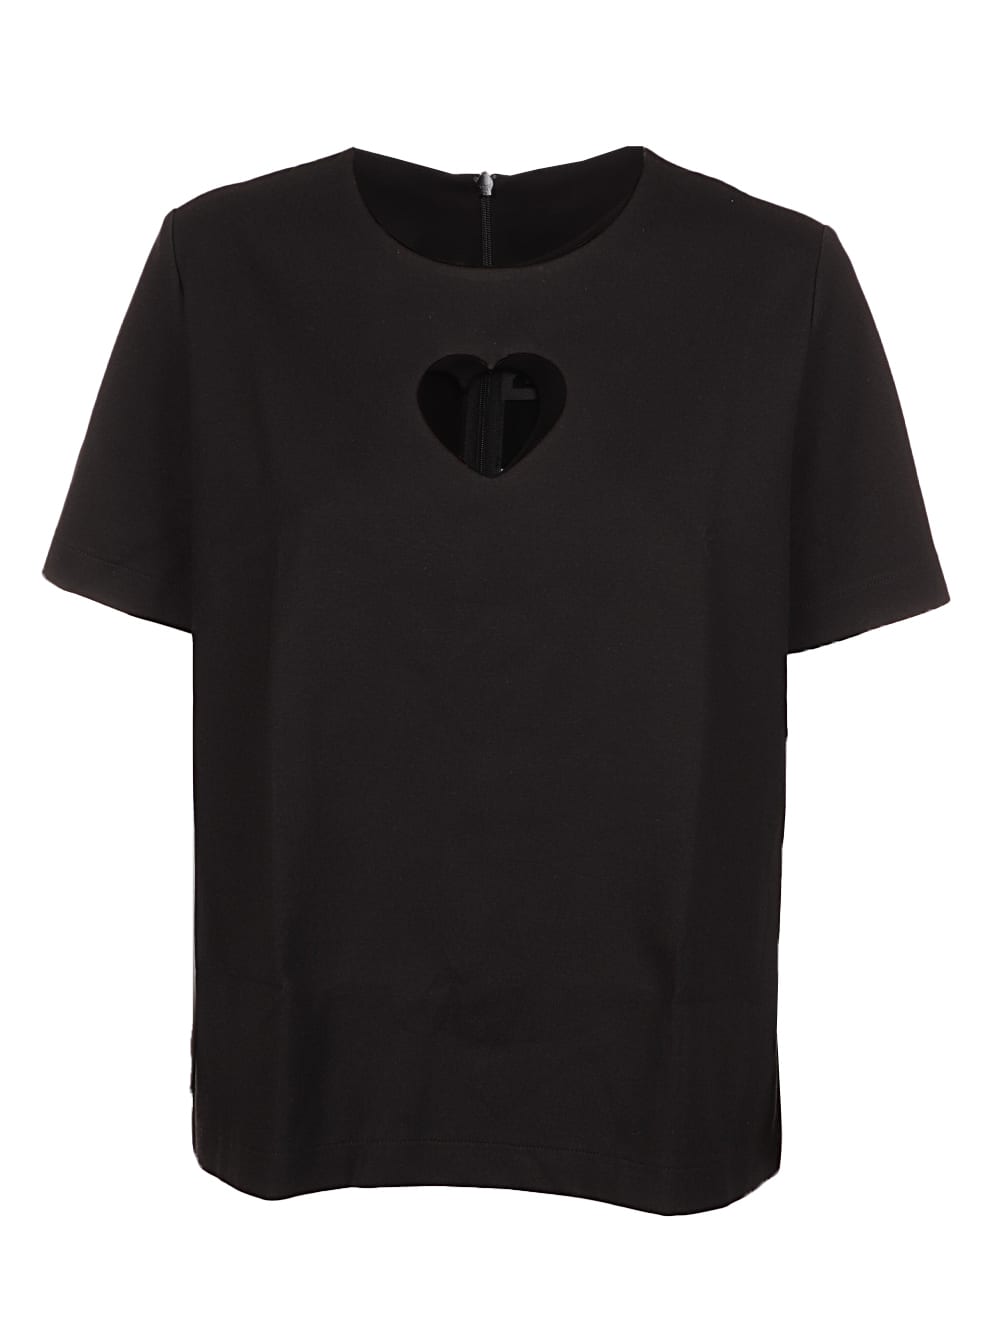 Paskal Short Sleeve Top With Heart Shaped Cut Out